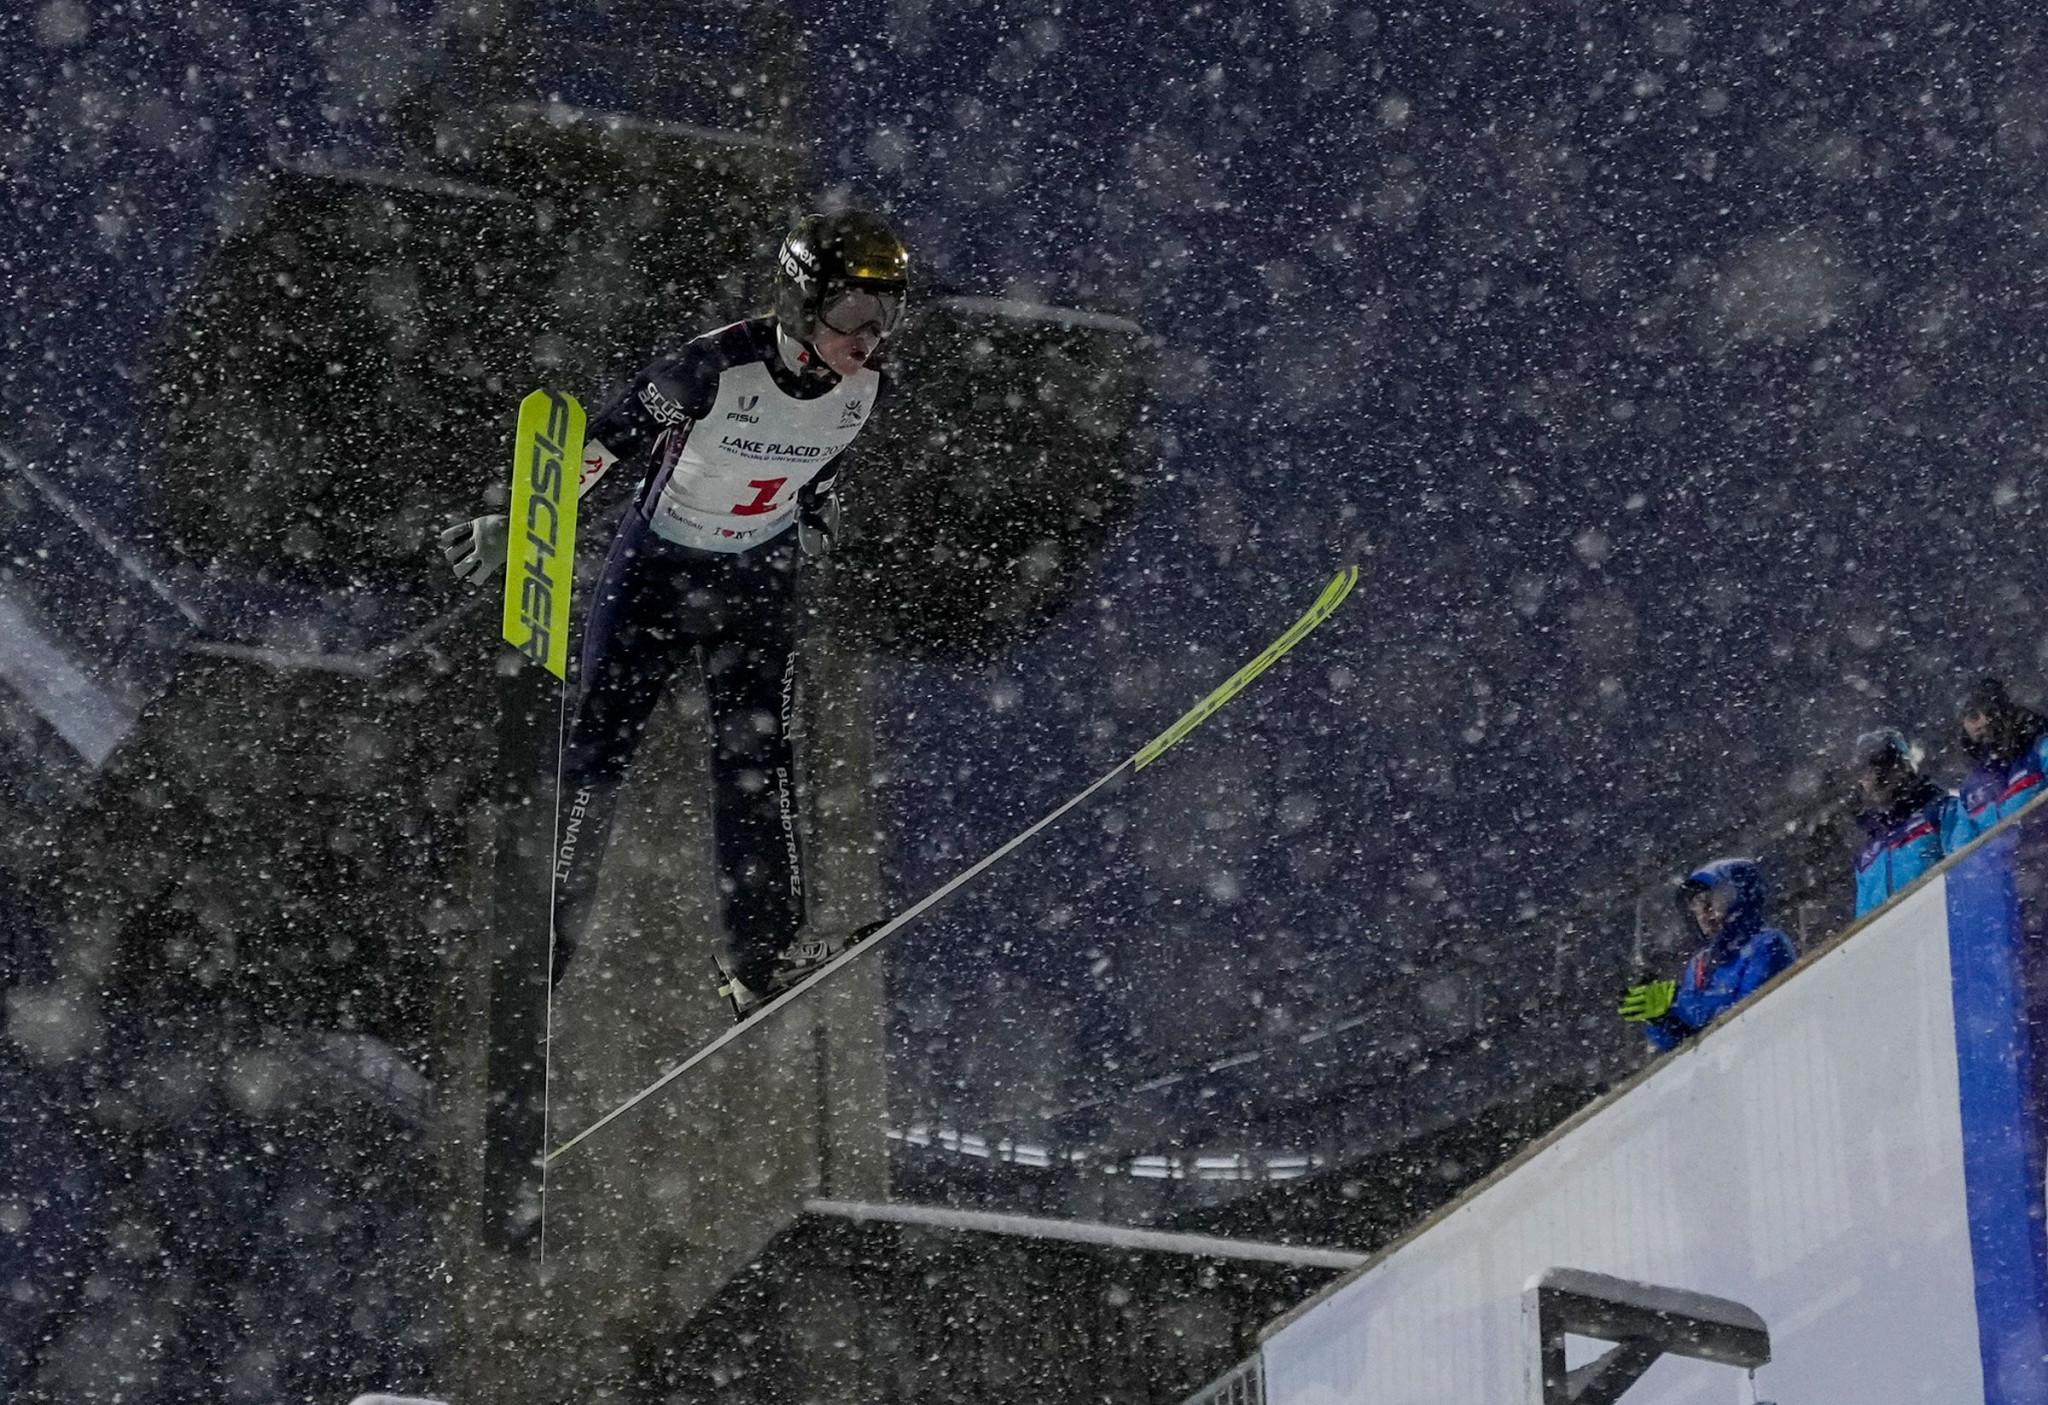 Two golds were awarded in the ski jumping competition which was played out in difficult conditions ©FISU